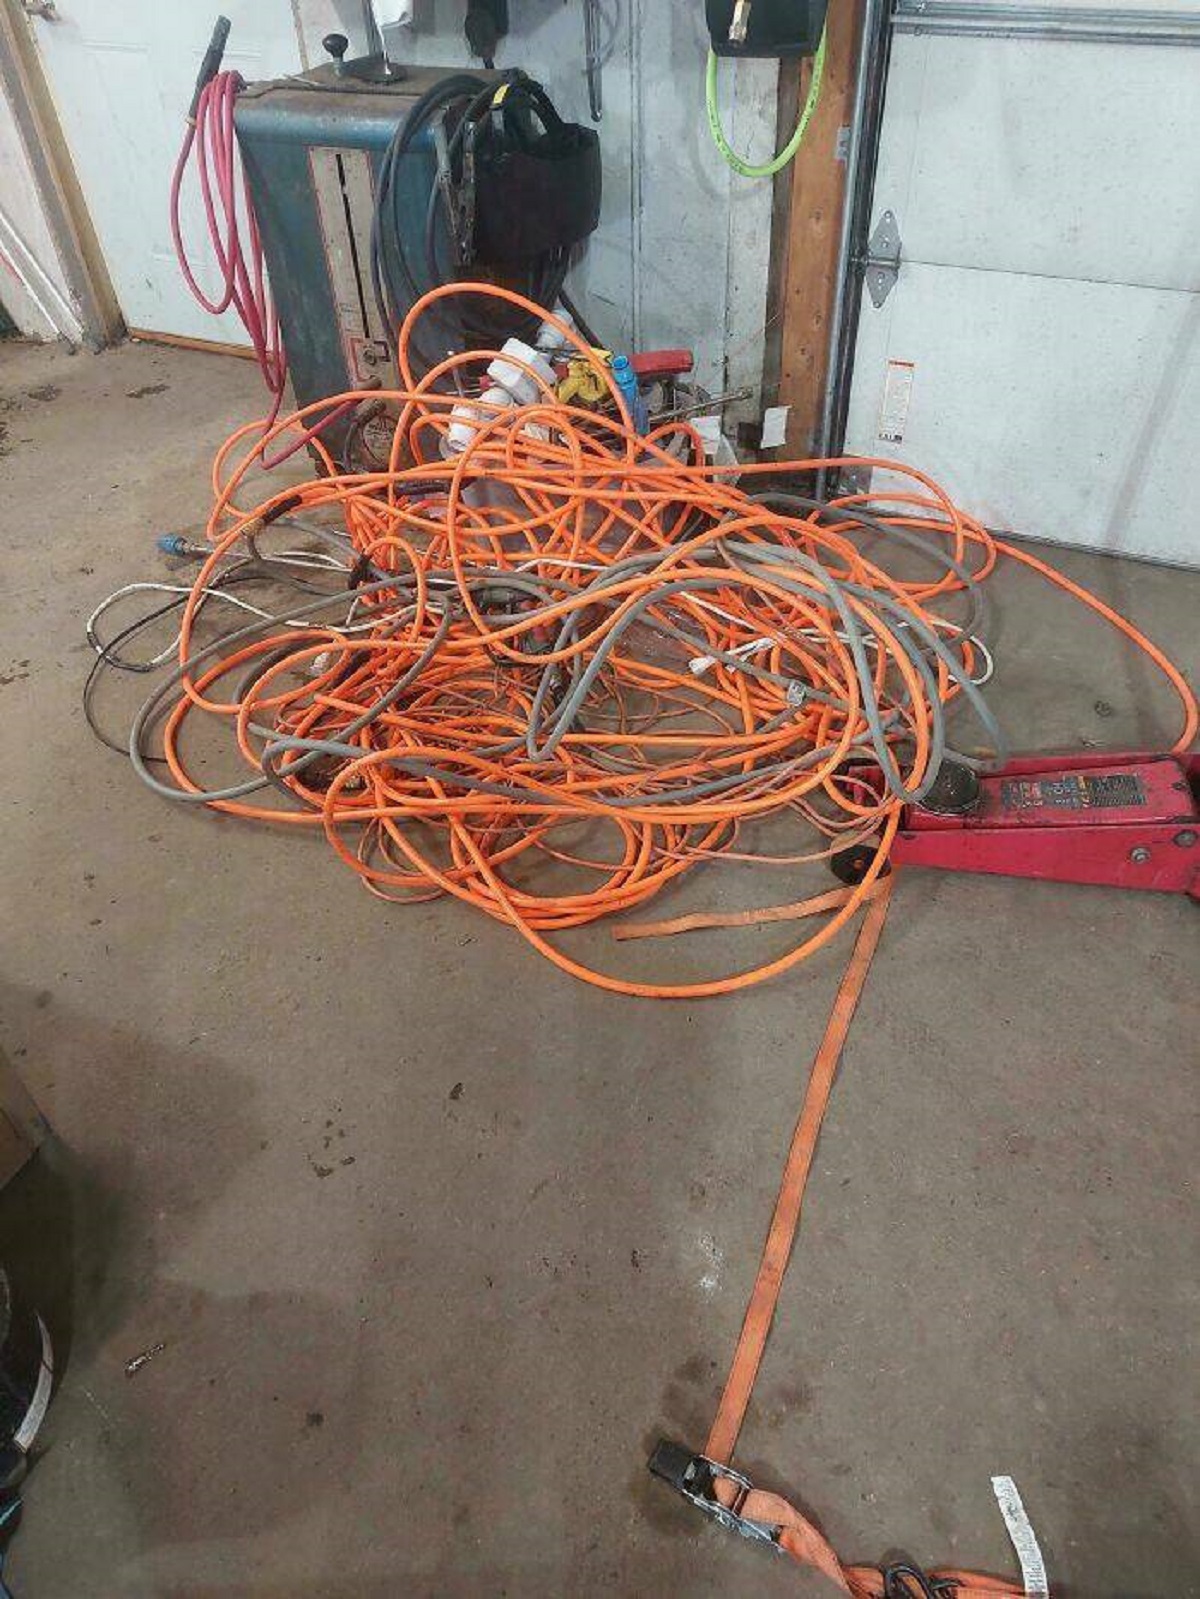 "Coworkers Have Done This Atleast 50 Times Now, It's 100ft Of Power Cord And Air Hose (100' Each), A Long Frozen Pressure Washer Hose And Another Cord"